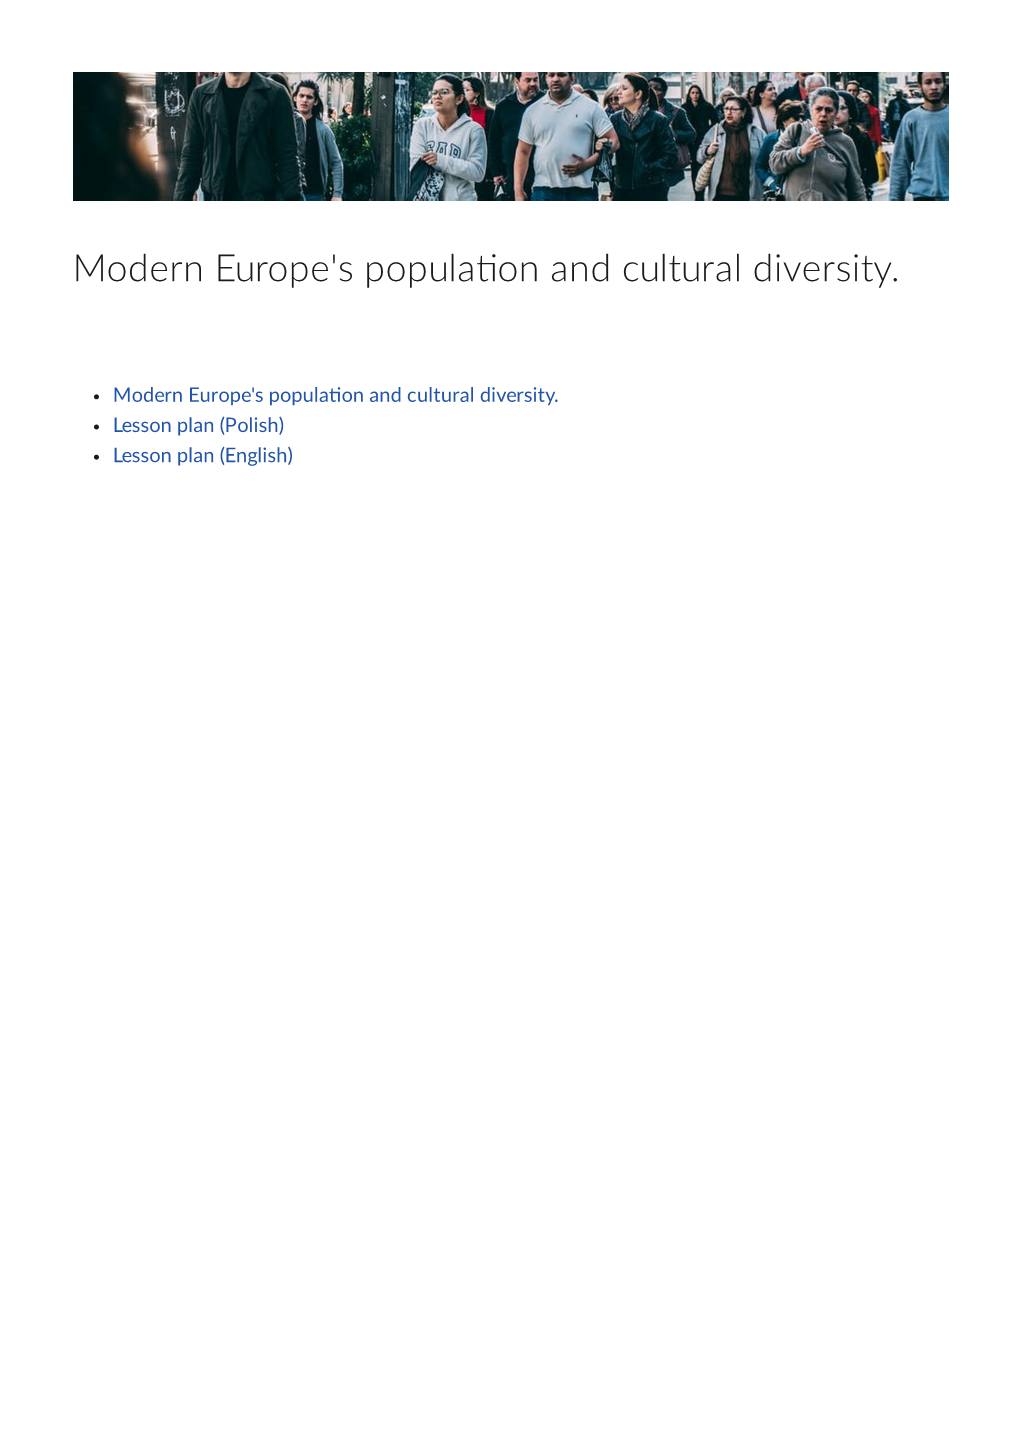 Modern Europe's Popula on and Cultural Diversity